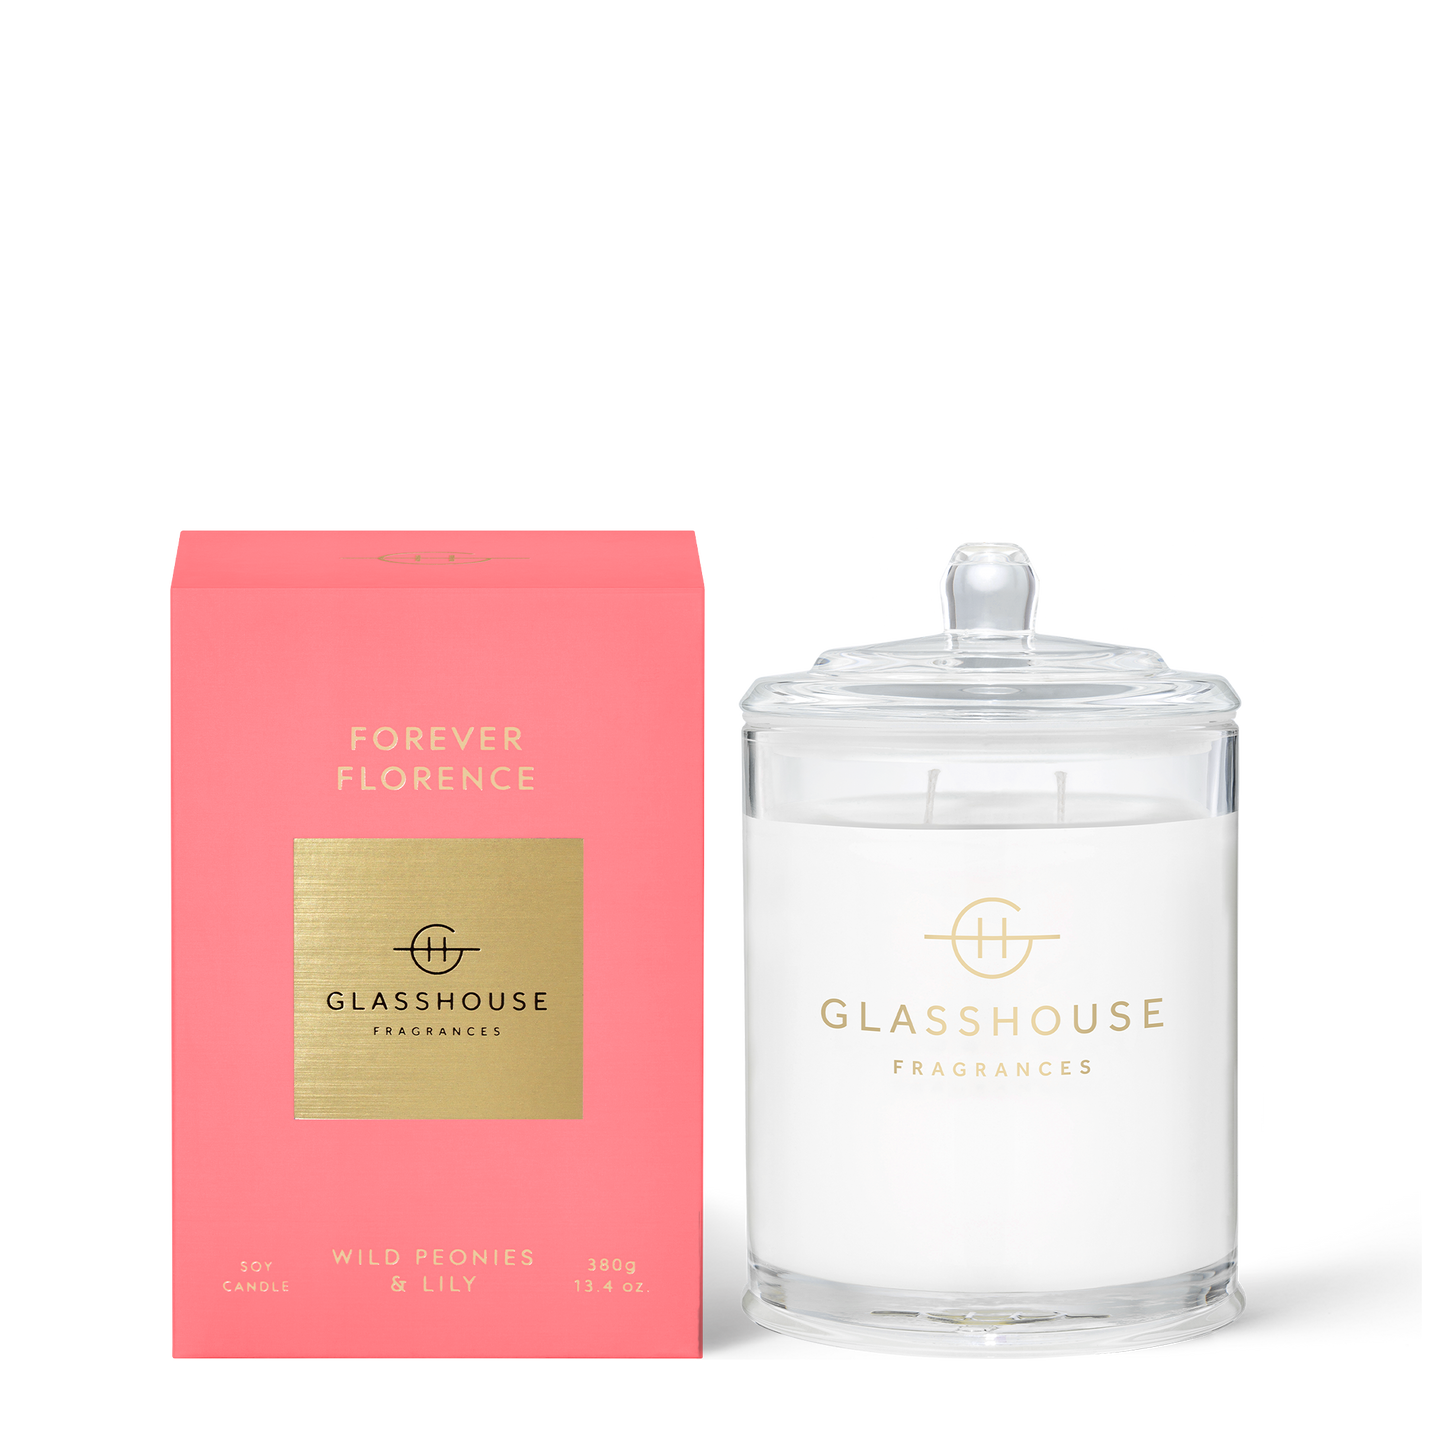 Forever Florence 380g Candle A transcendent everyday luxury, it creates instant ambience. A flower market under the Tuscan sun. You pick up peonies, jasmine and a hint of peach.